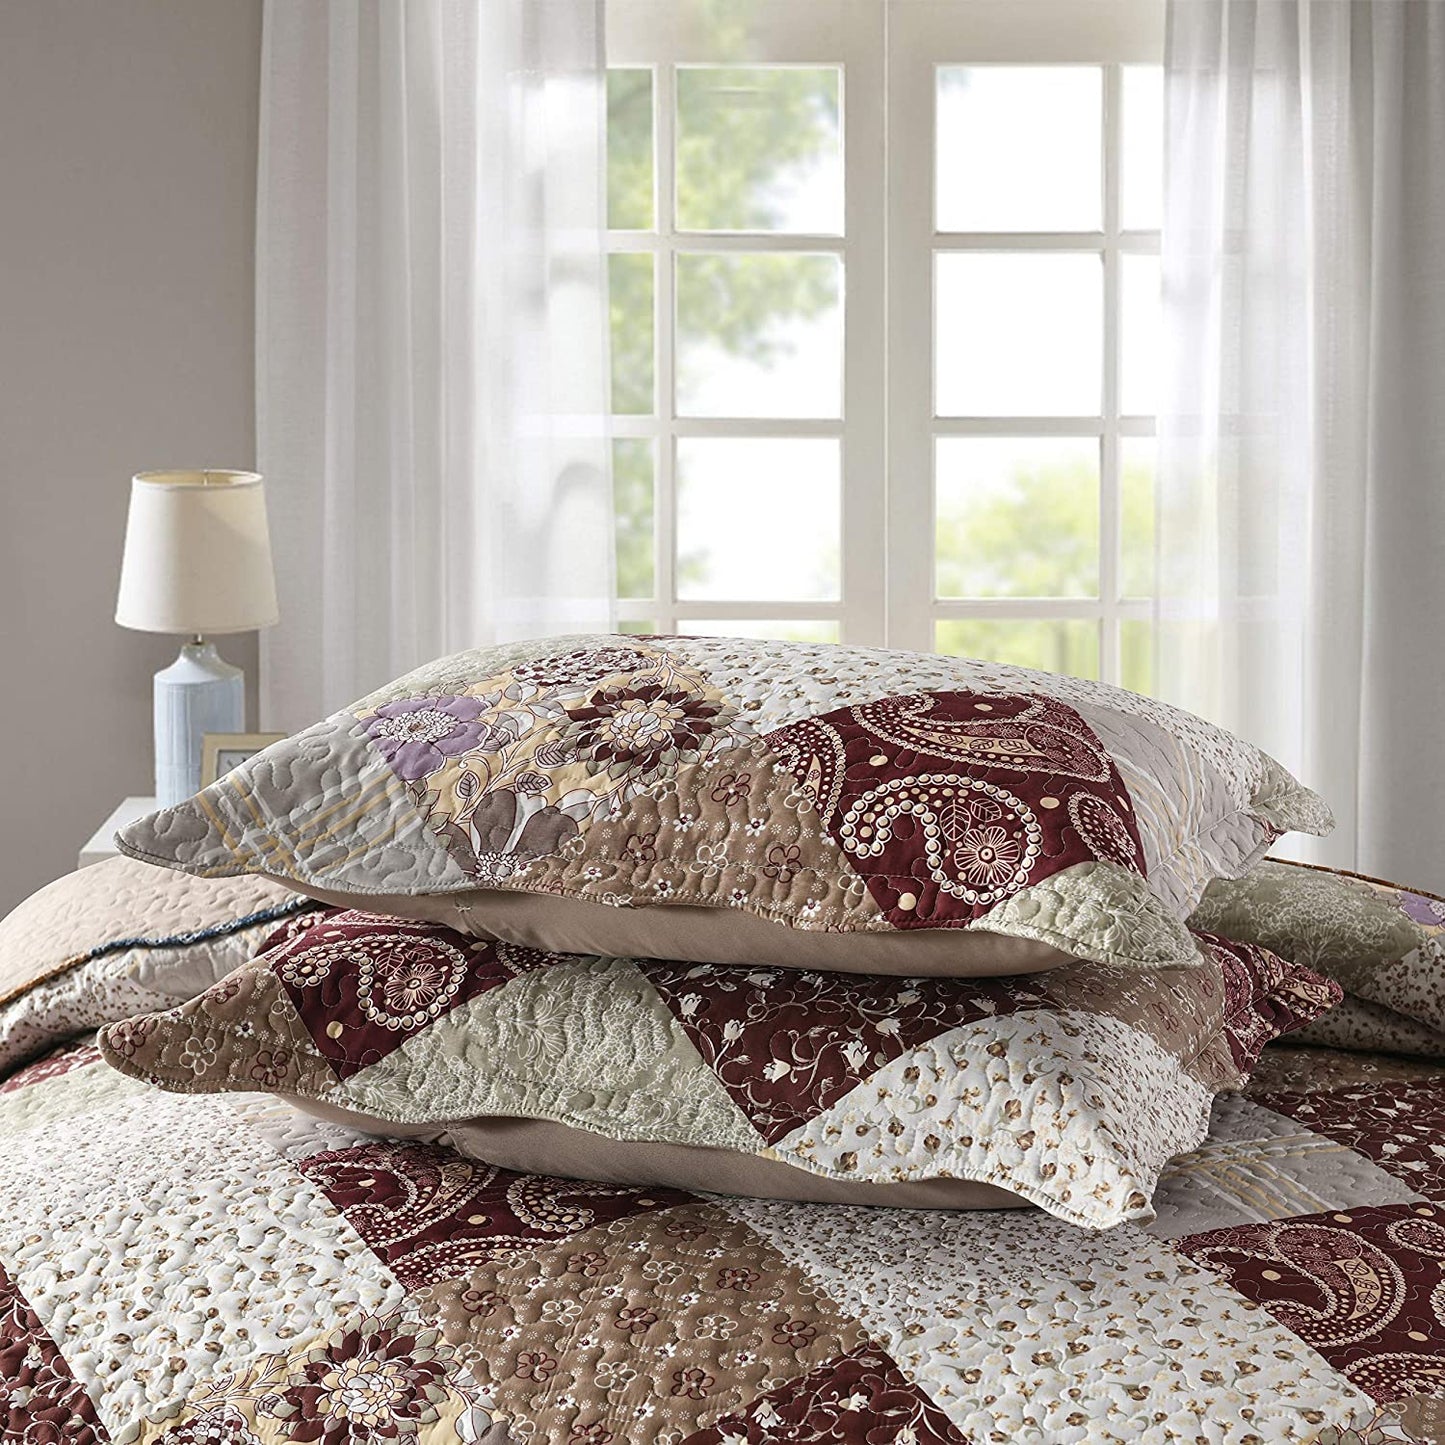 Patchwork Brown Floral Patchwork Brown 3 Pieces Quilt Set With 2 Pillowcases